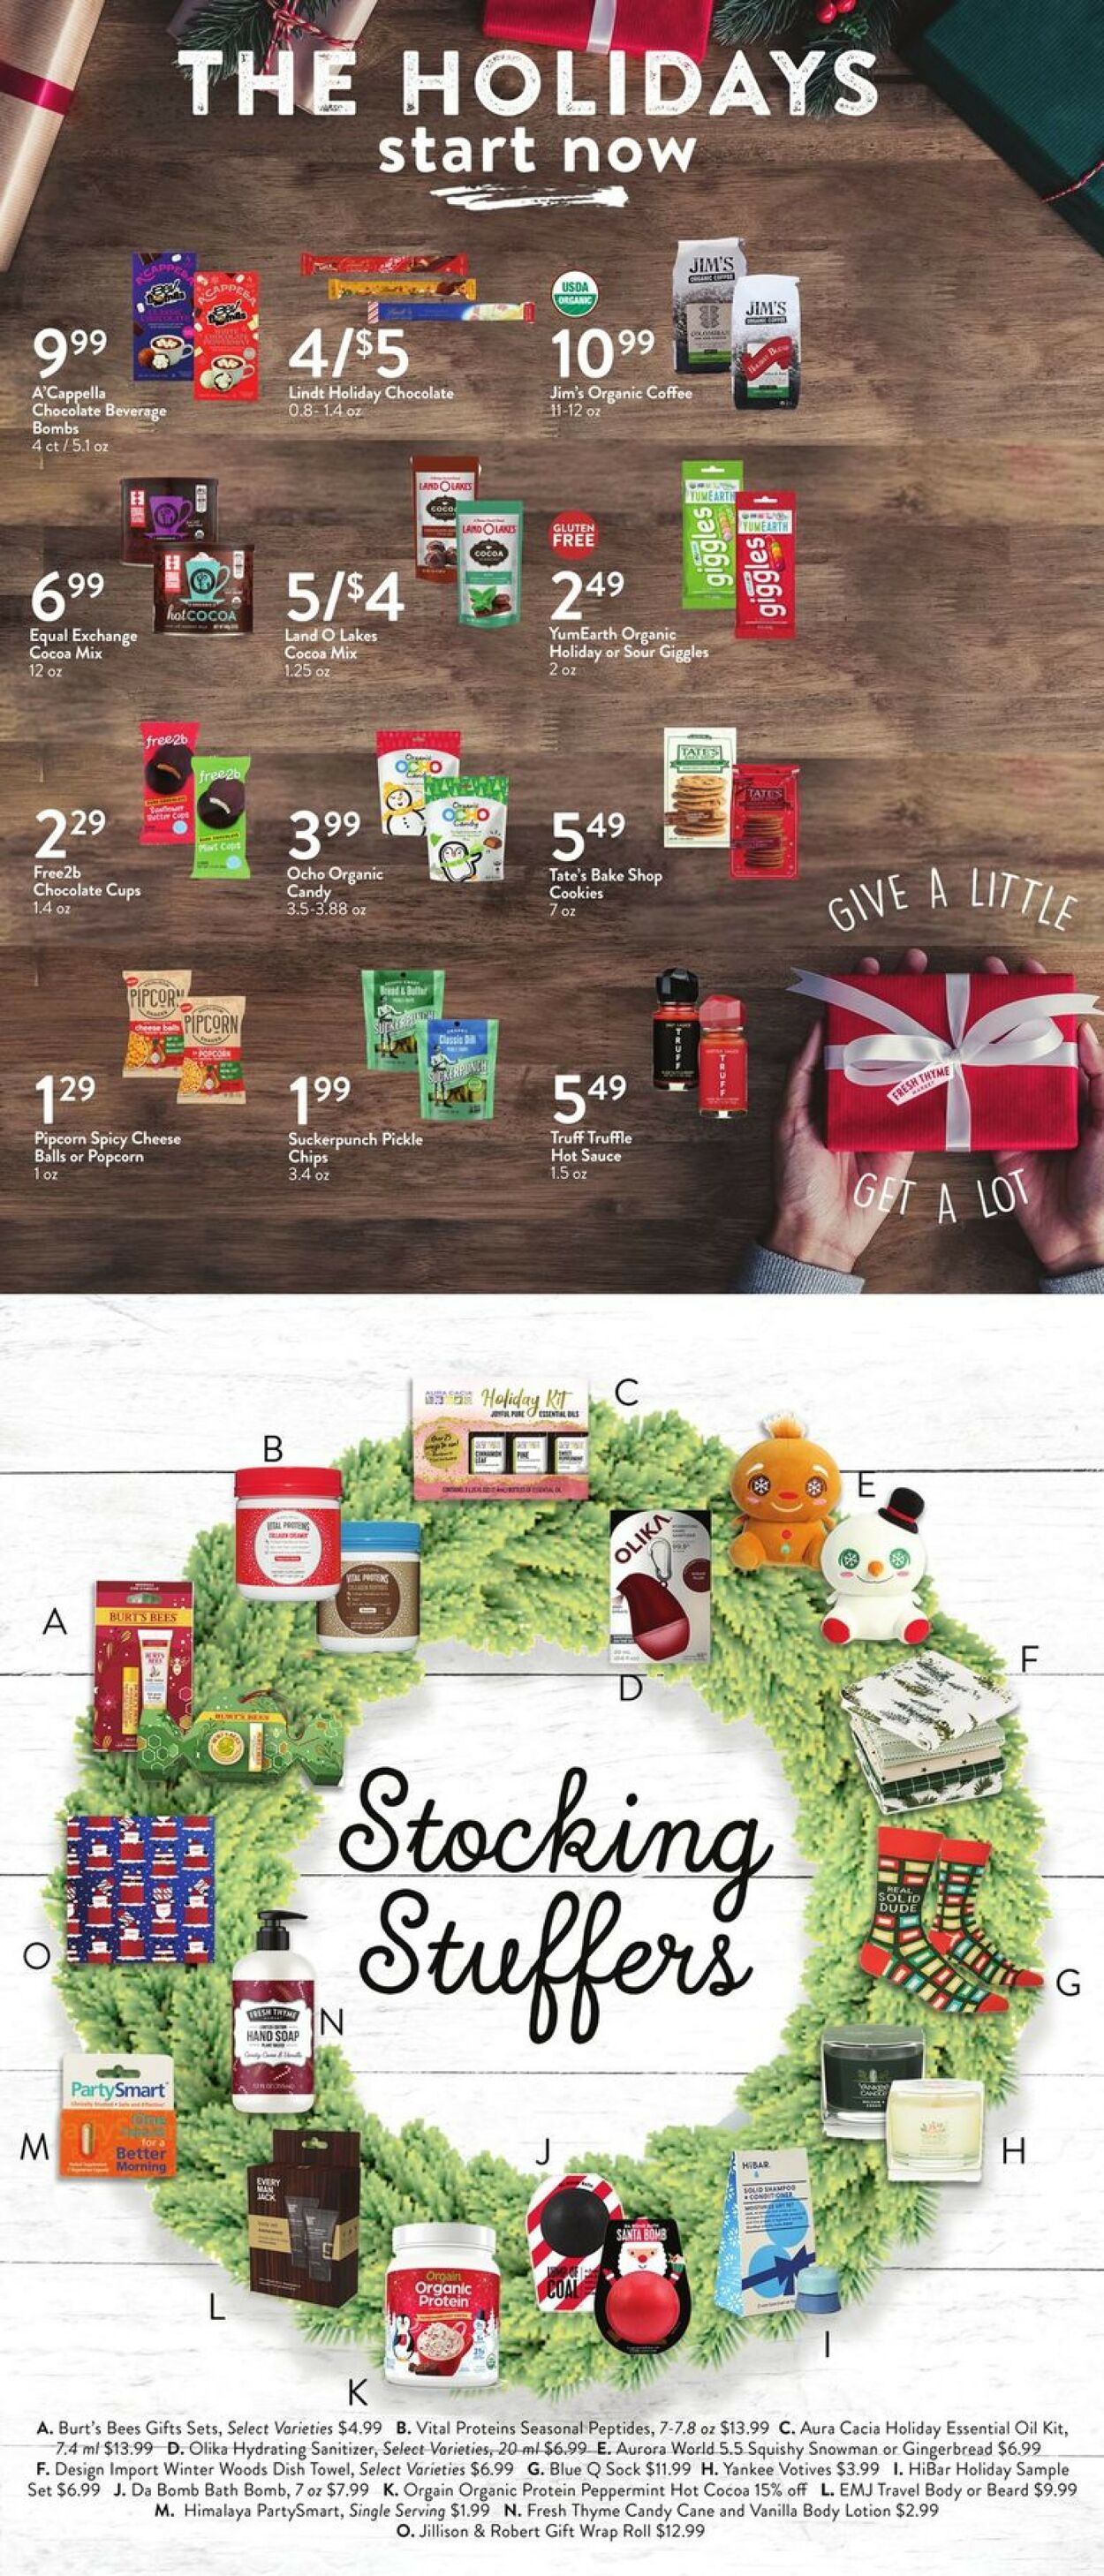 Fresh Thyme Ad from 12/07/2022